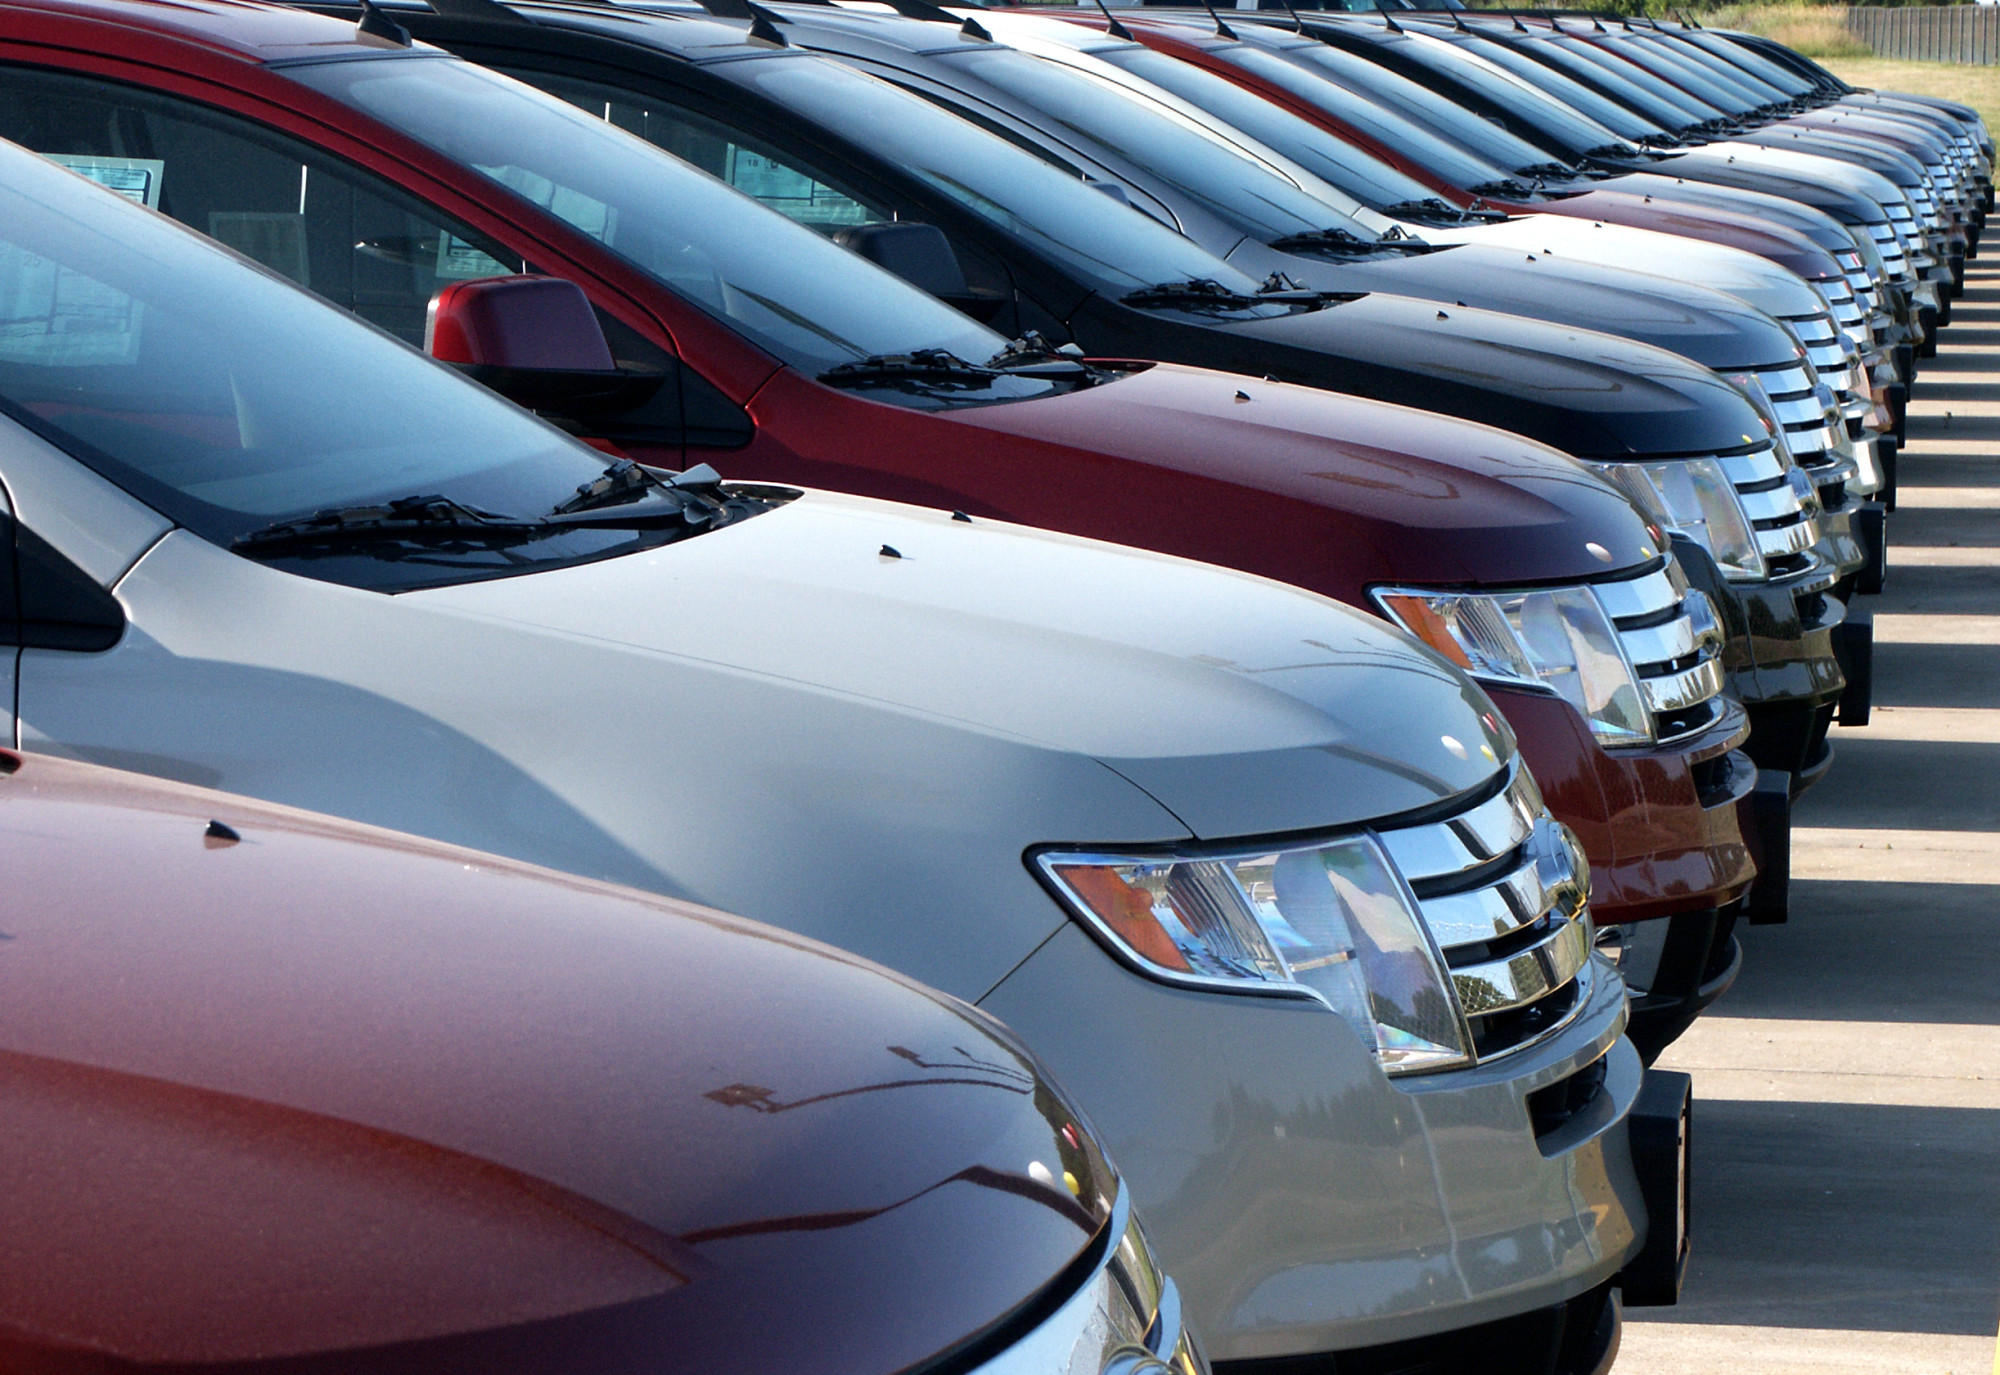 Here's How Some Smart Car Dealers Load Their Lots and Get Their Cars